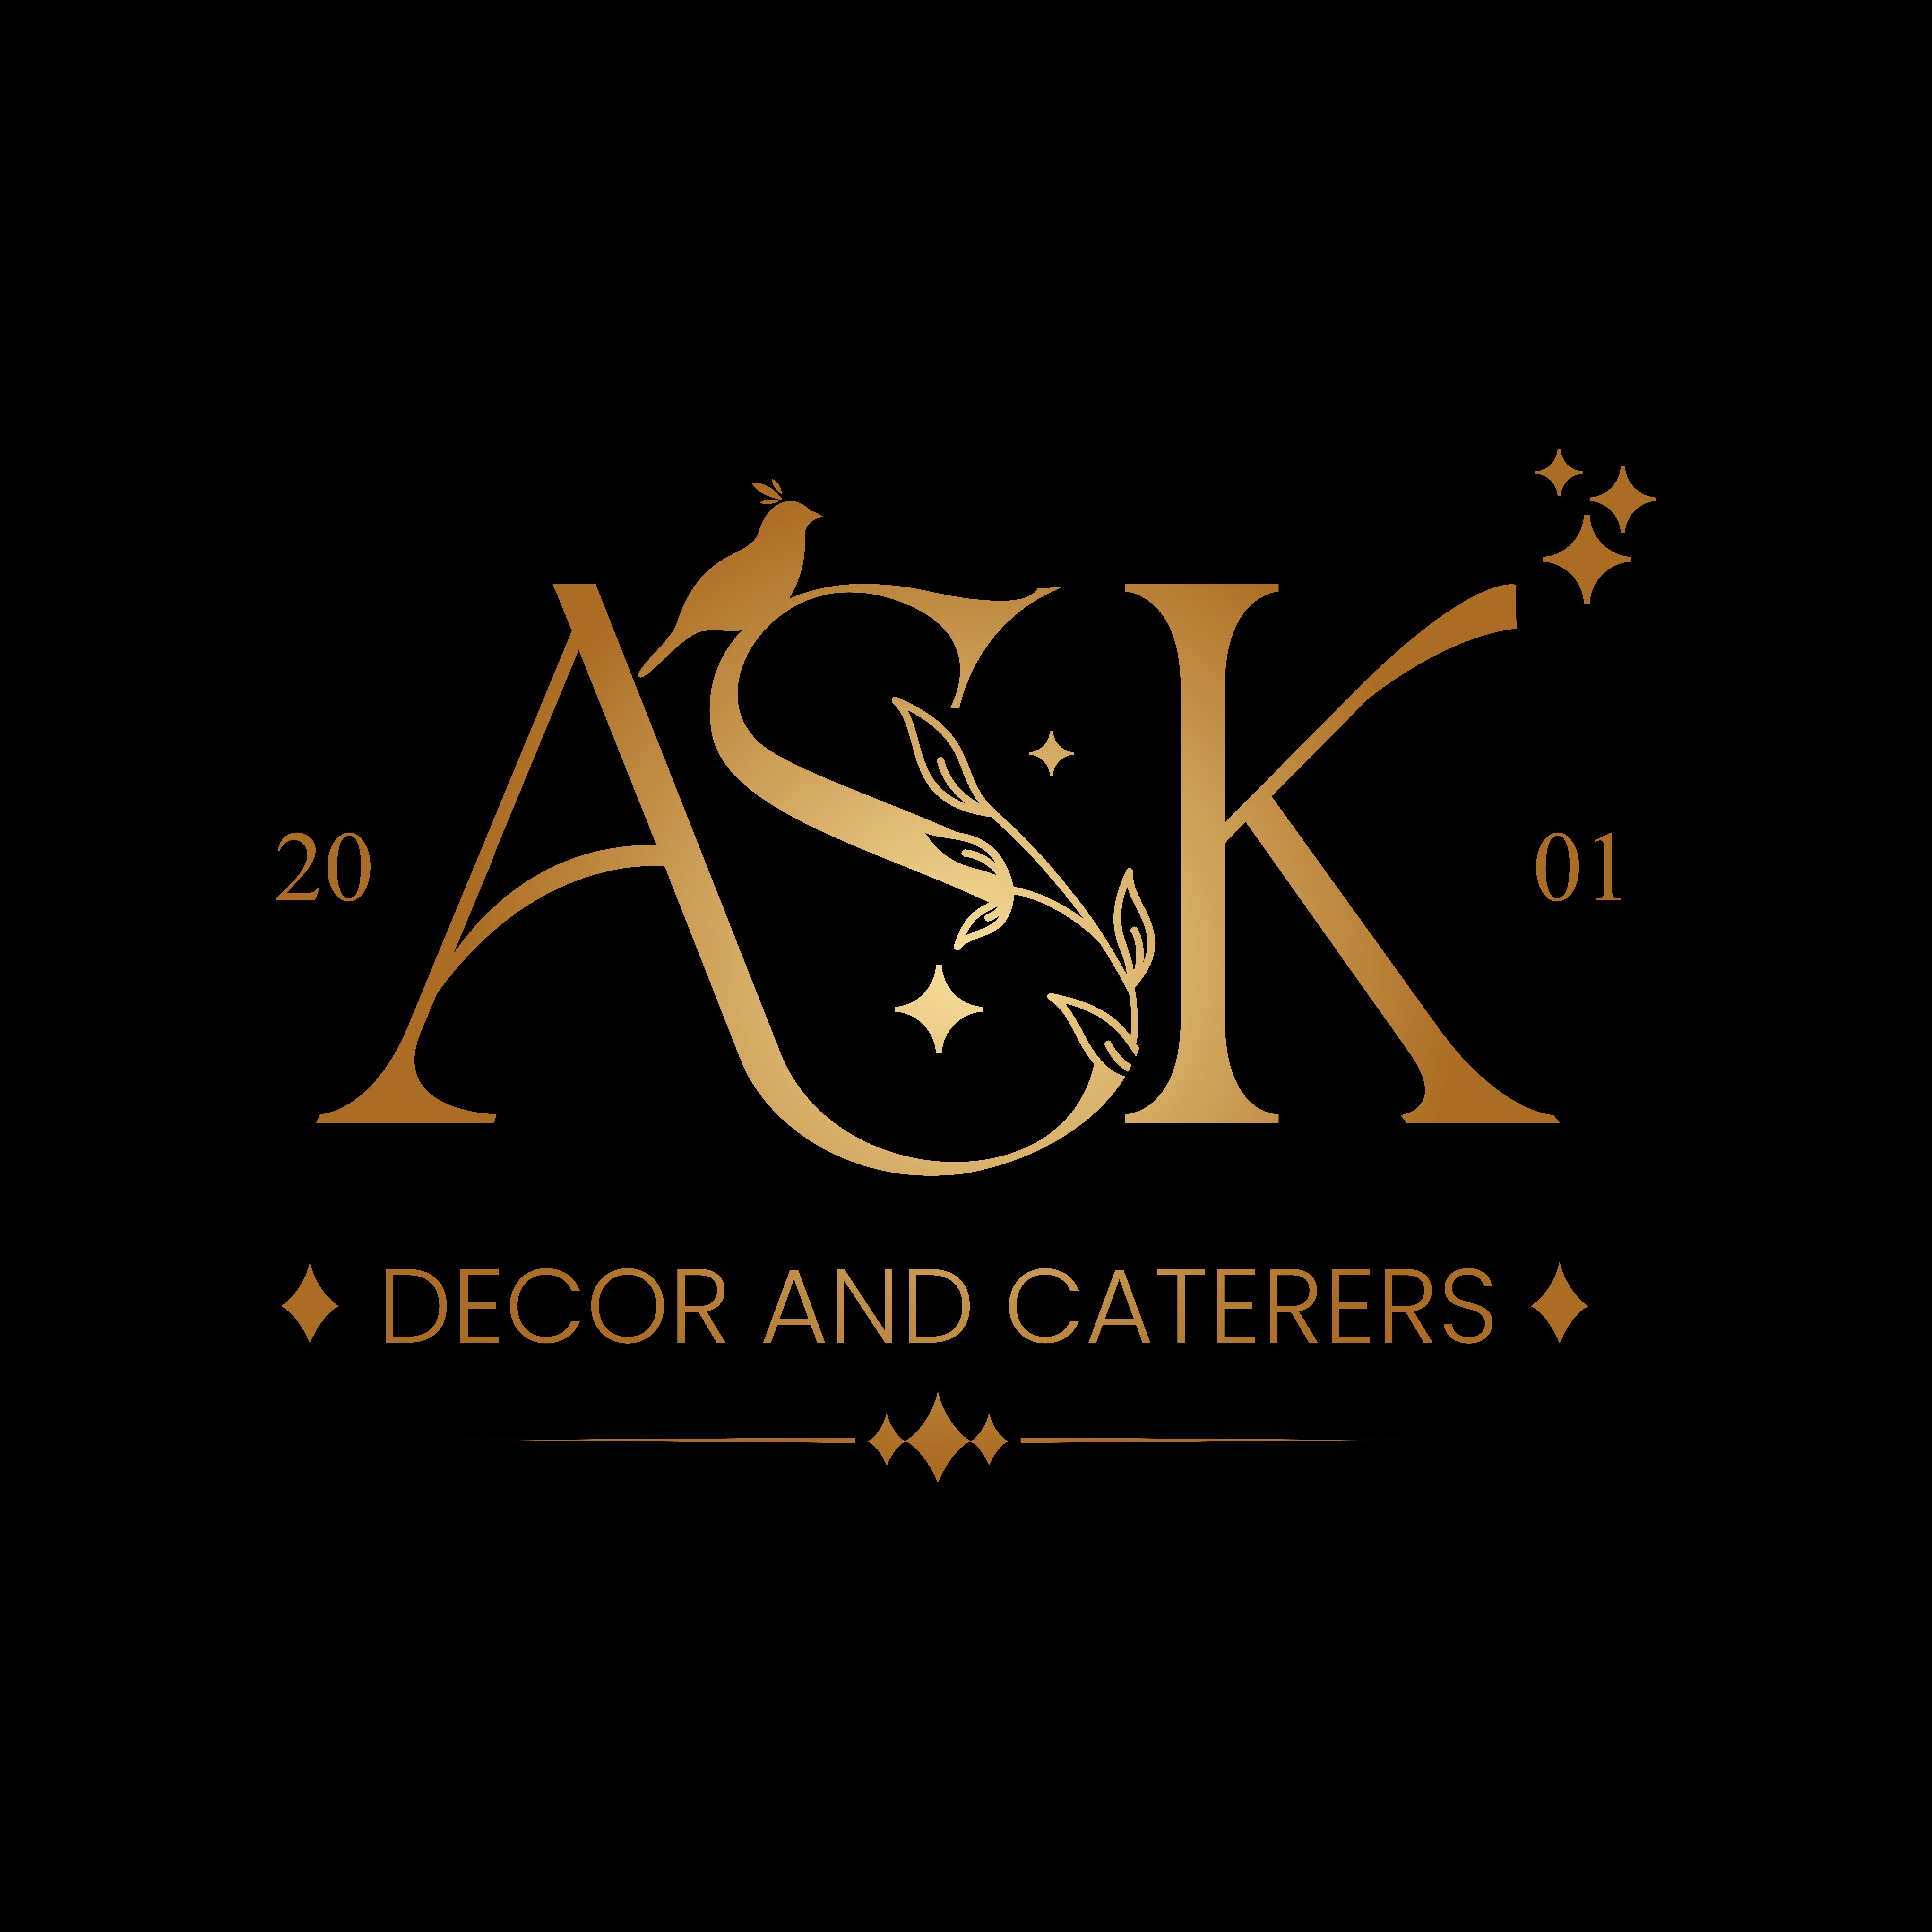 A.S.K. Decor and Caterers